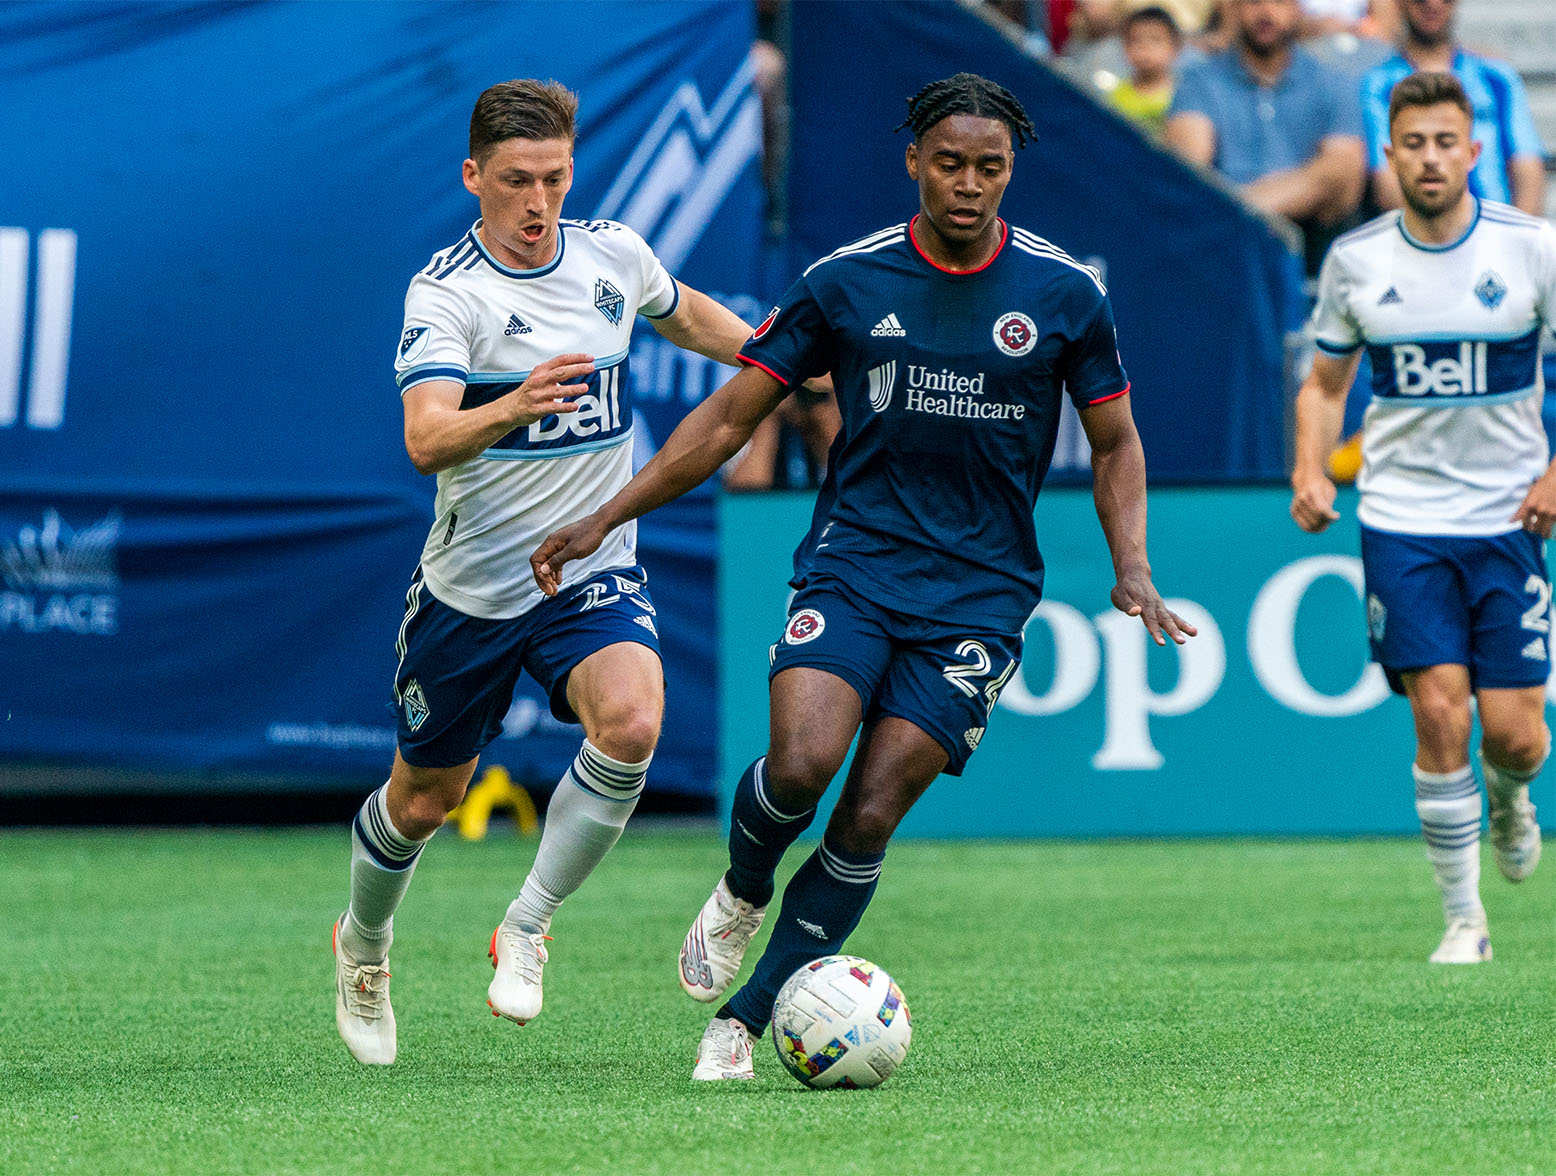 VANCOUVER, BC - JUNE 26: DeJuan Jones #24 of the New England Revolution breaks away during the game between Vancouver Whitecaps and the New England Revolution at BC Place on June 26, 2022 in Vancouver, British Columbia. (Photo by Jordan Jones/Getty Images)